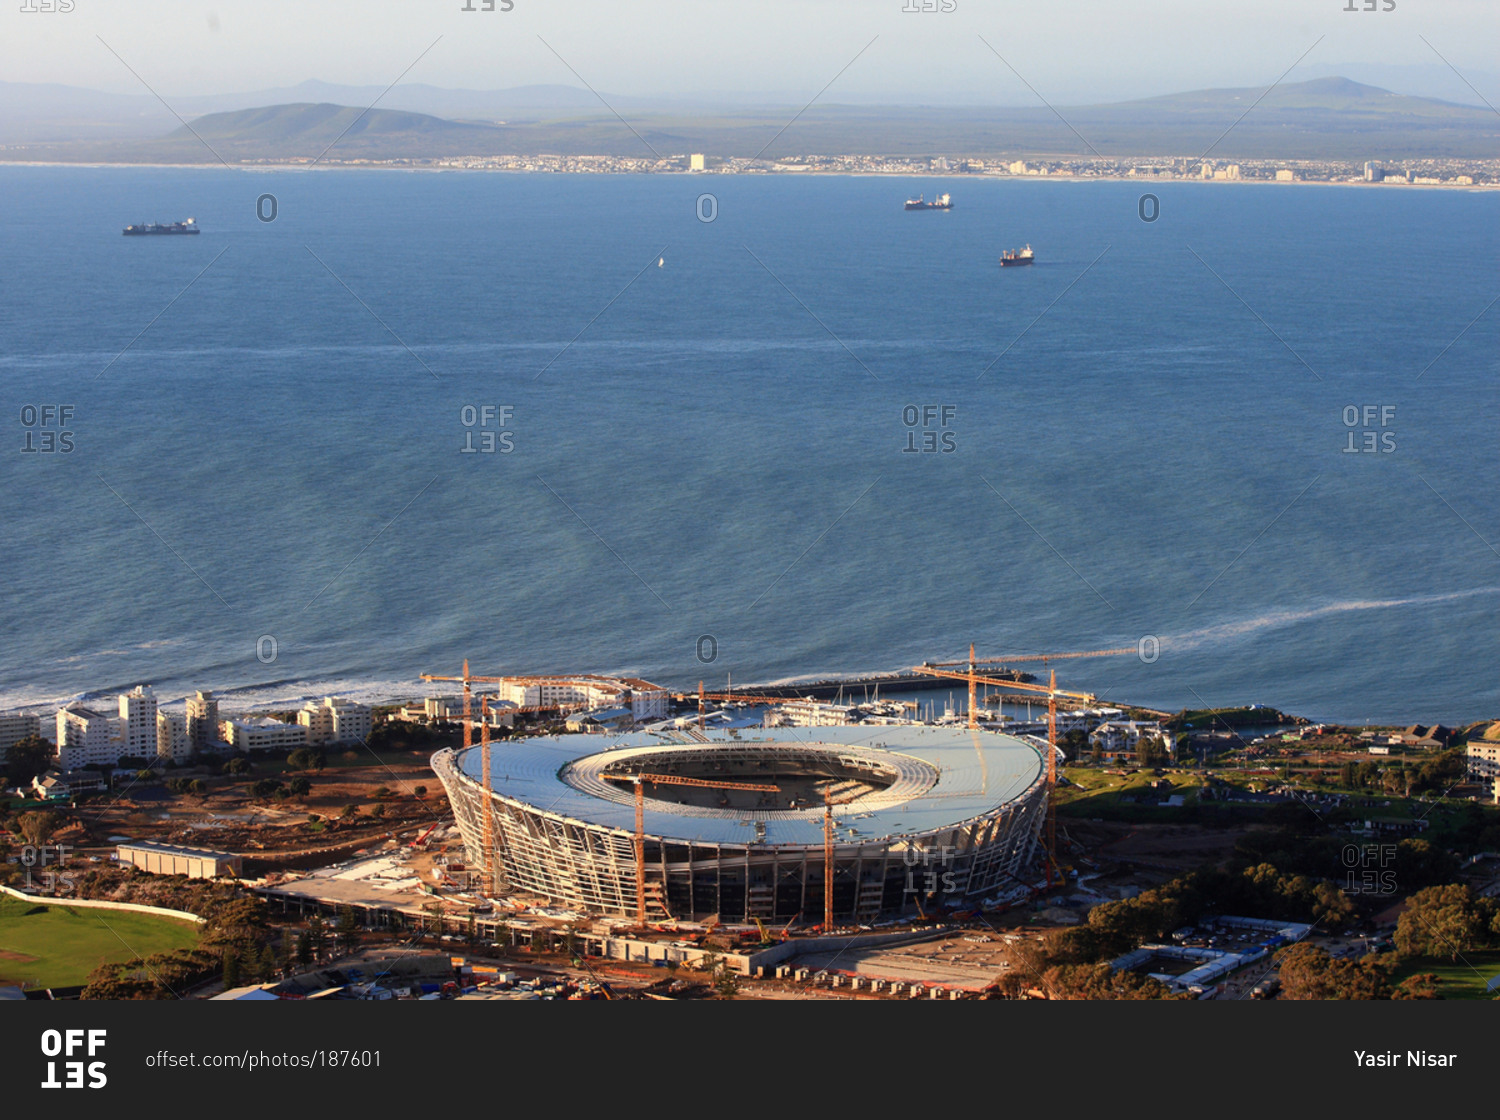 The Cape Town Stadium under construction, South Africa